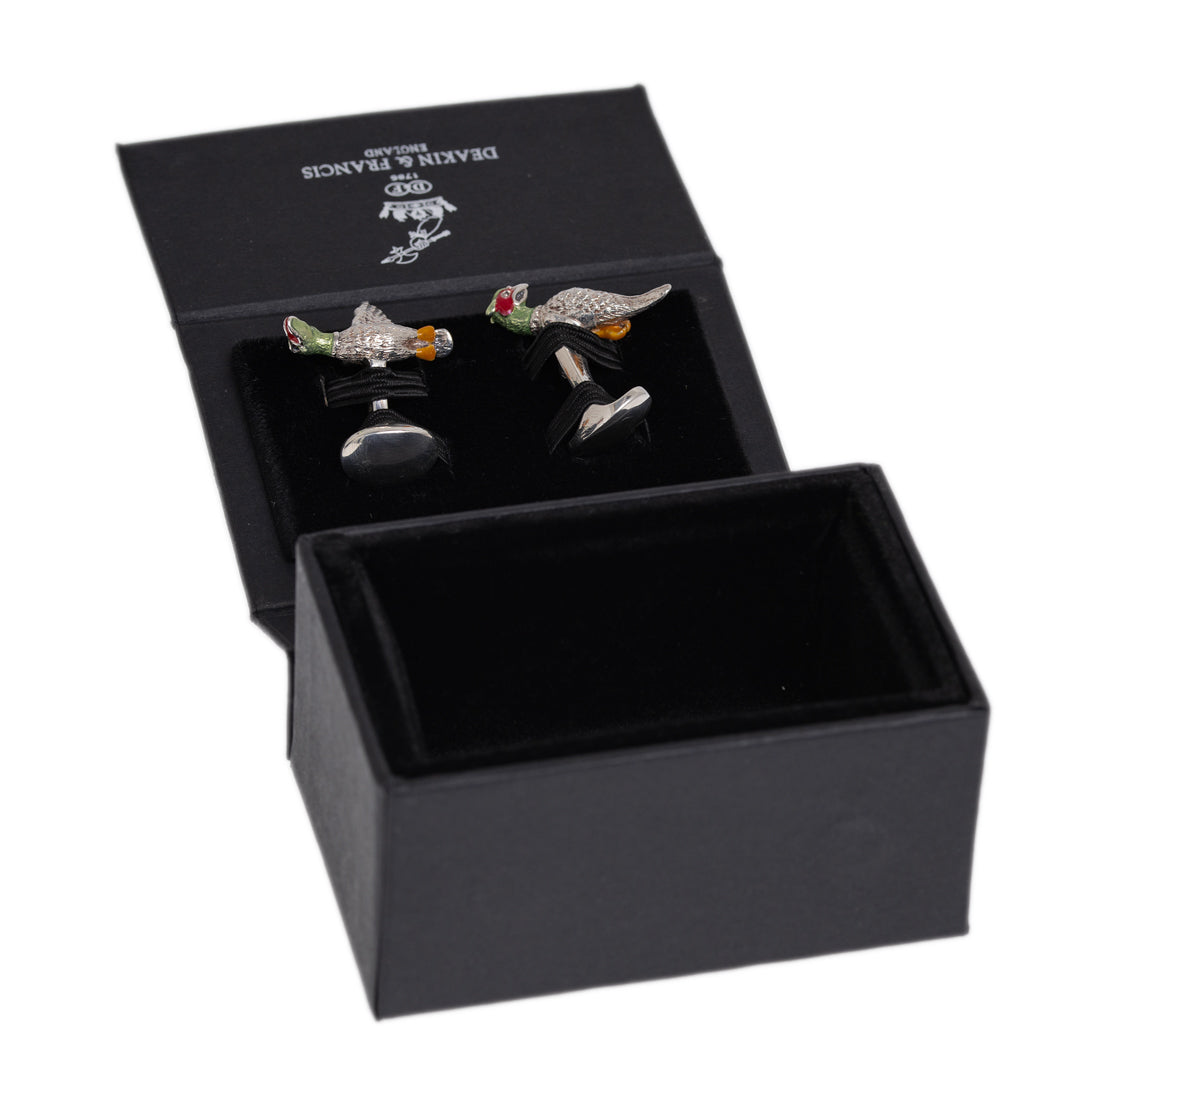 Pair Deakin & Francis Solid Silver & Enamel Angry Game Bird Cufflinks In Box  (Code A1095)